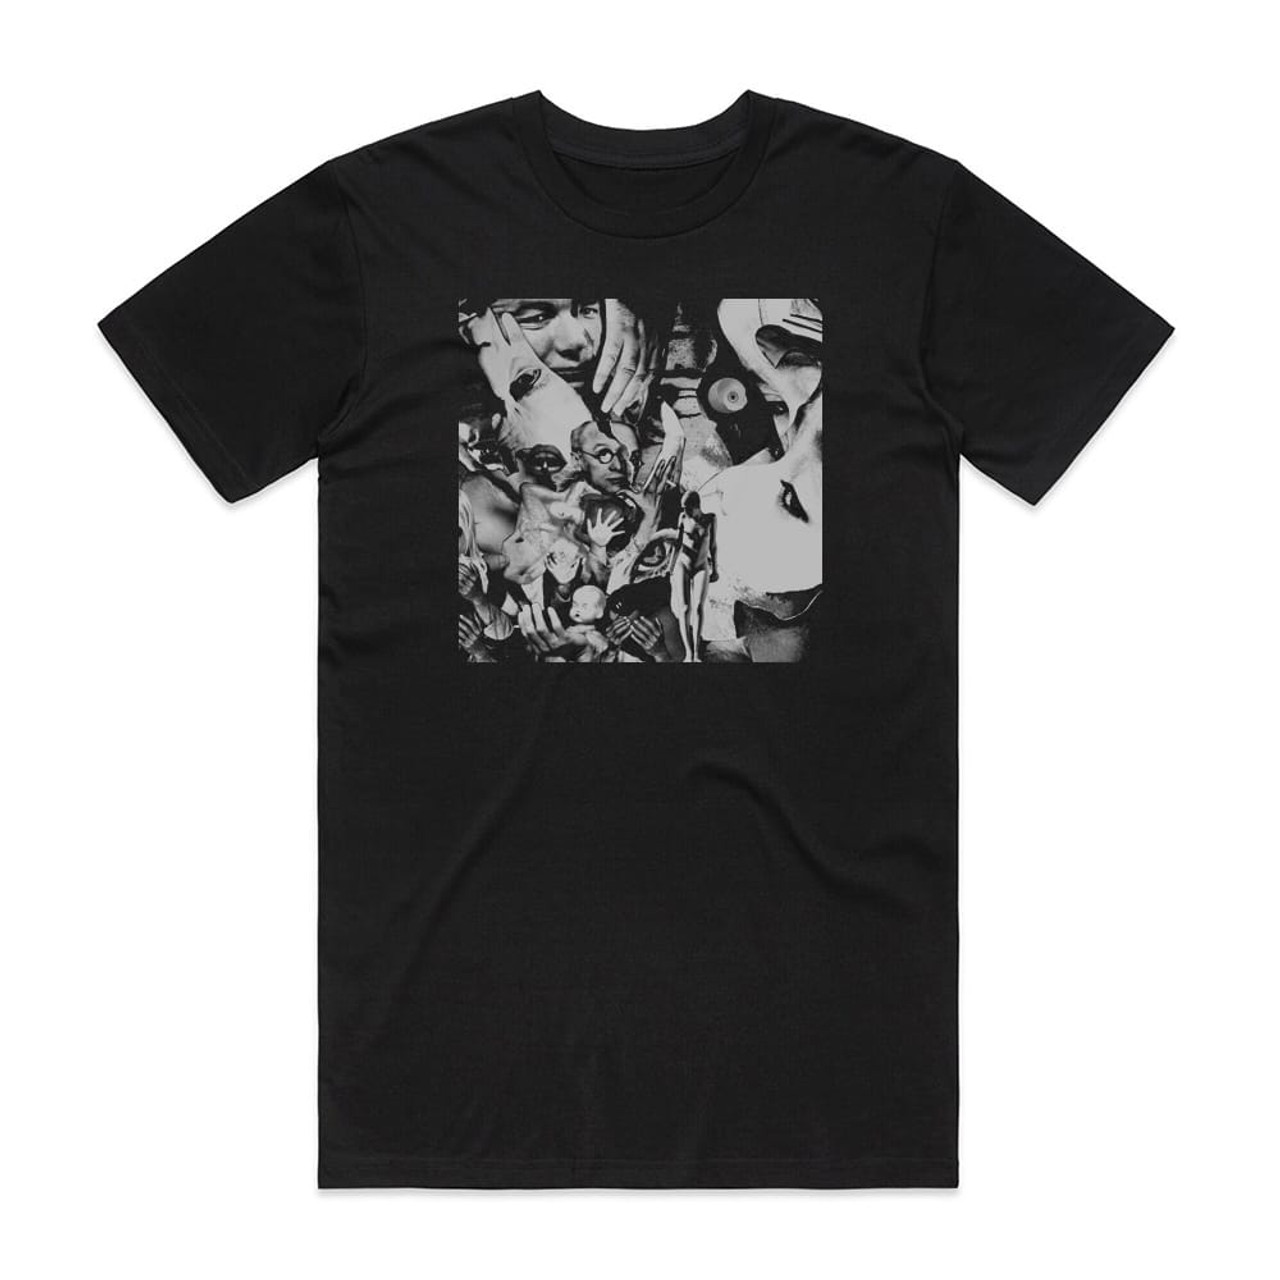 Nurse With Wound Homotopy To Marie Album Cover T-Shirt Black